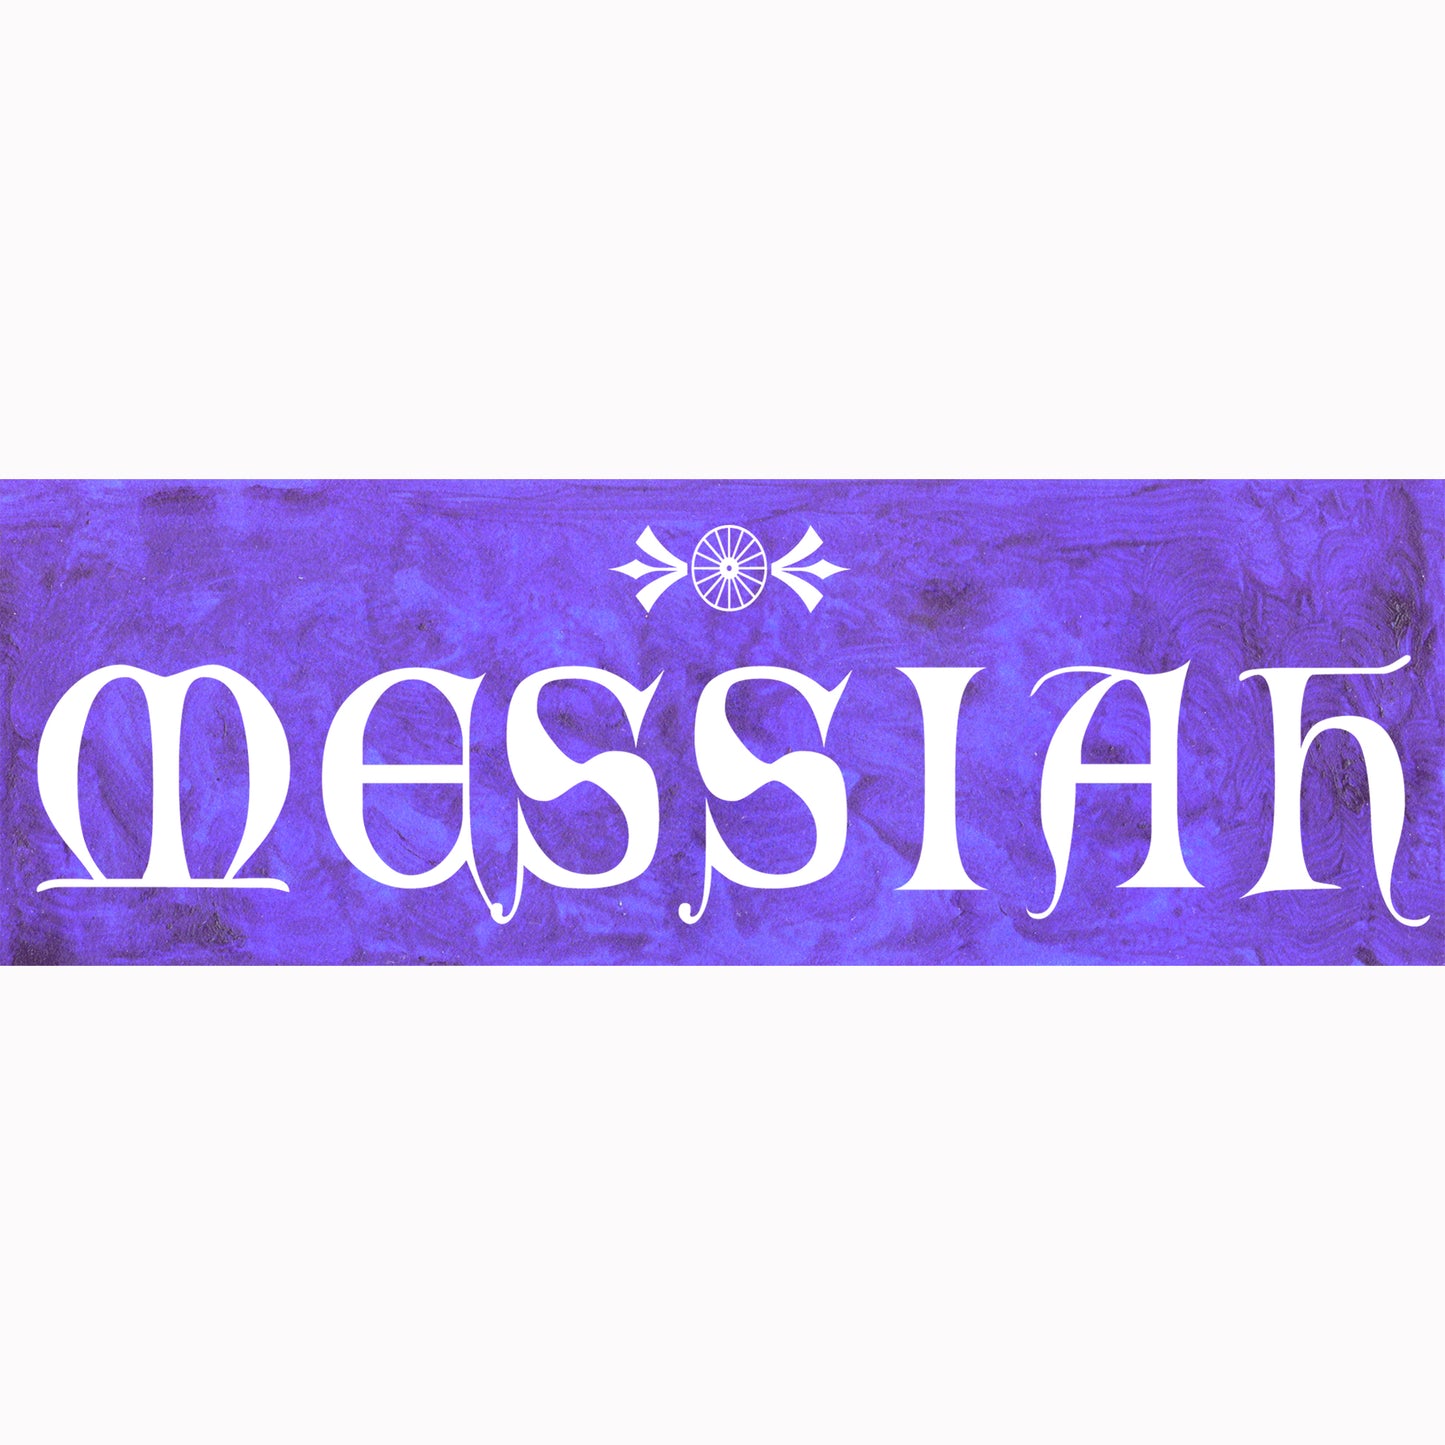 A Very Merry Christmas - Messiah Bookmark